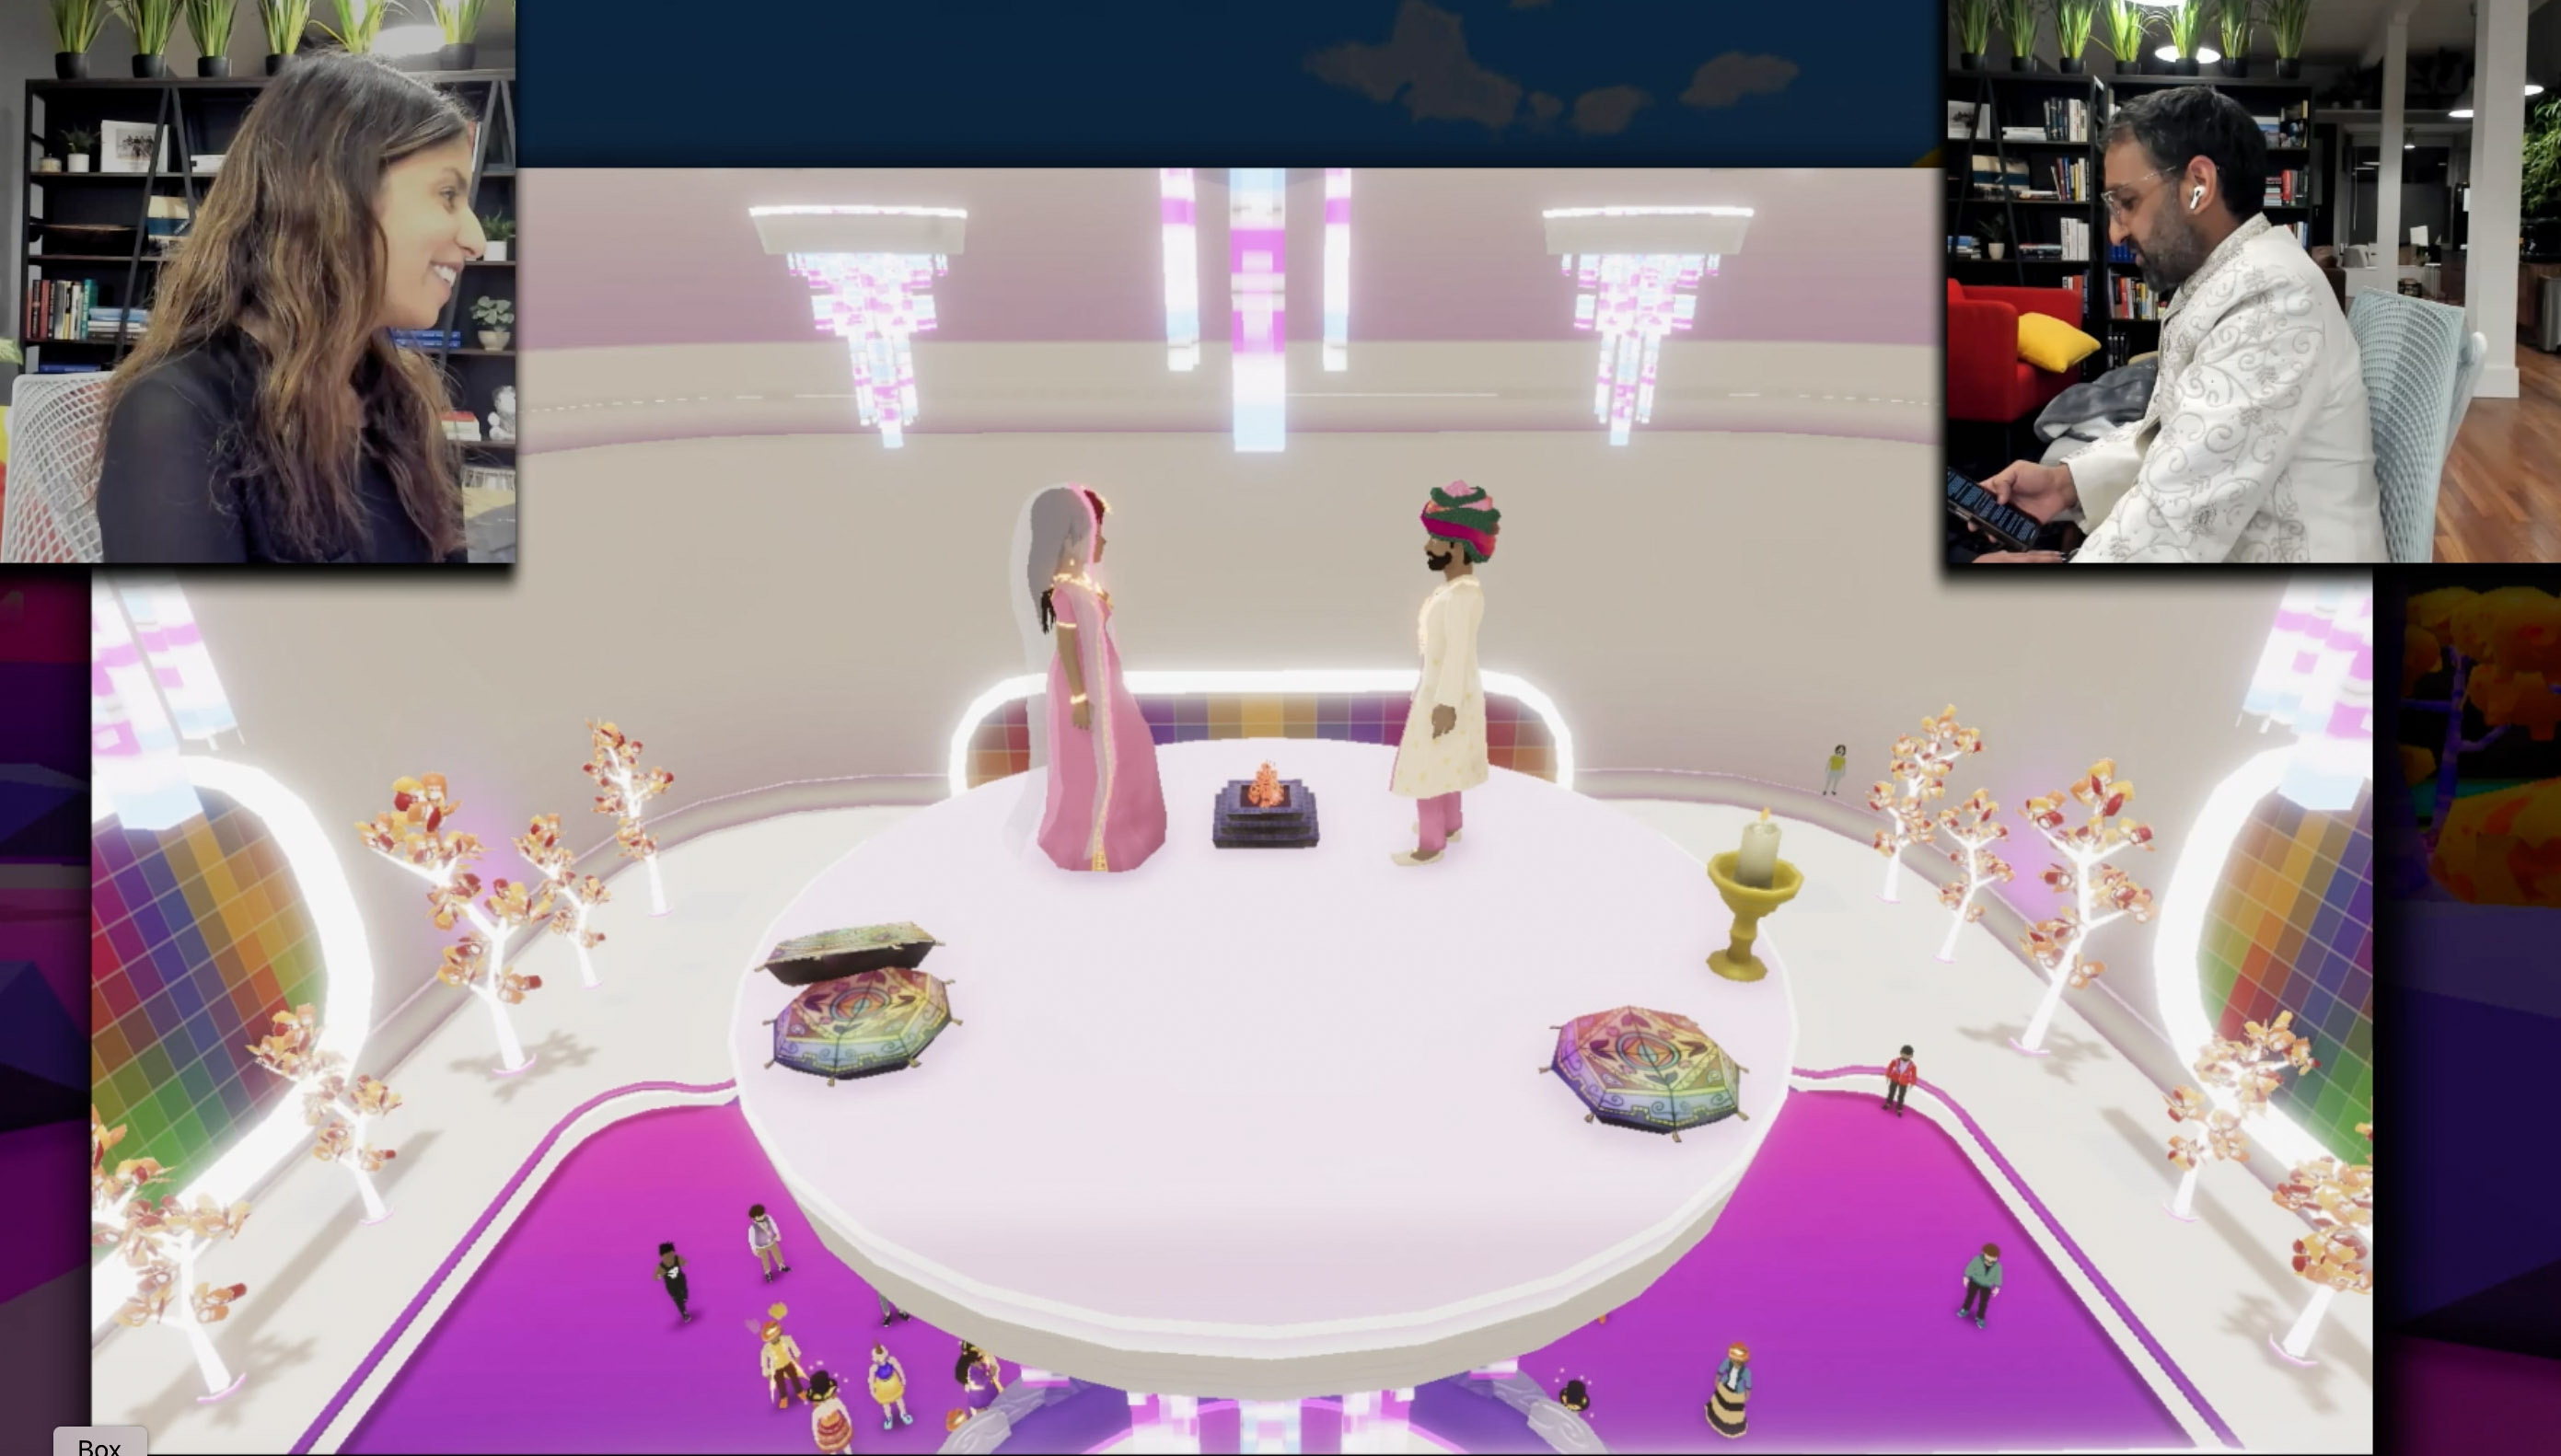 digital image of a woman and man in indian attire getting married in the metaverse with a livestream of bride and groom inset